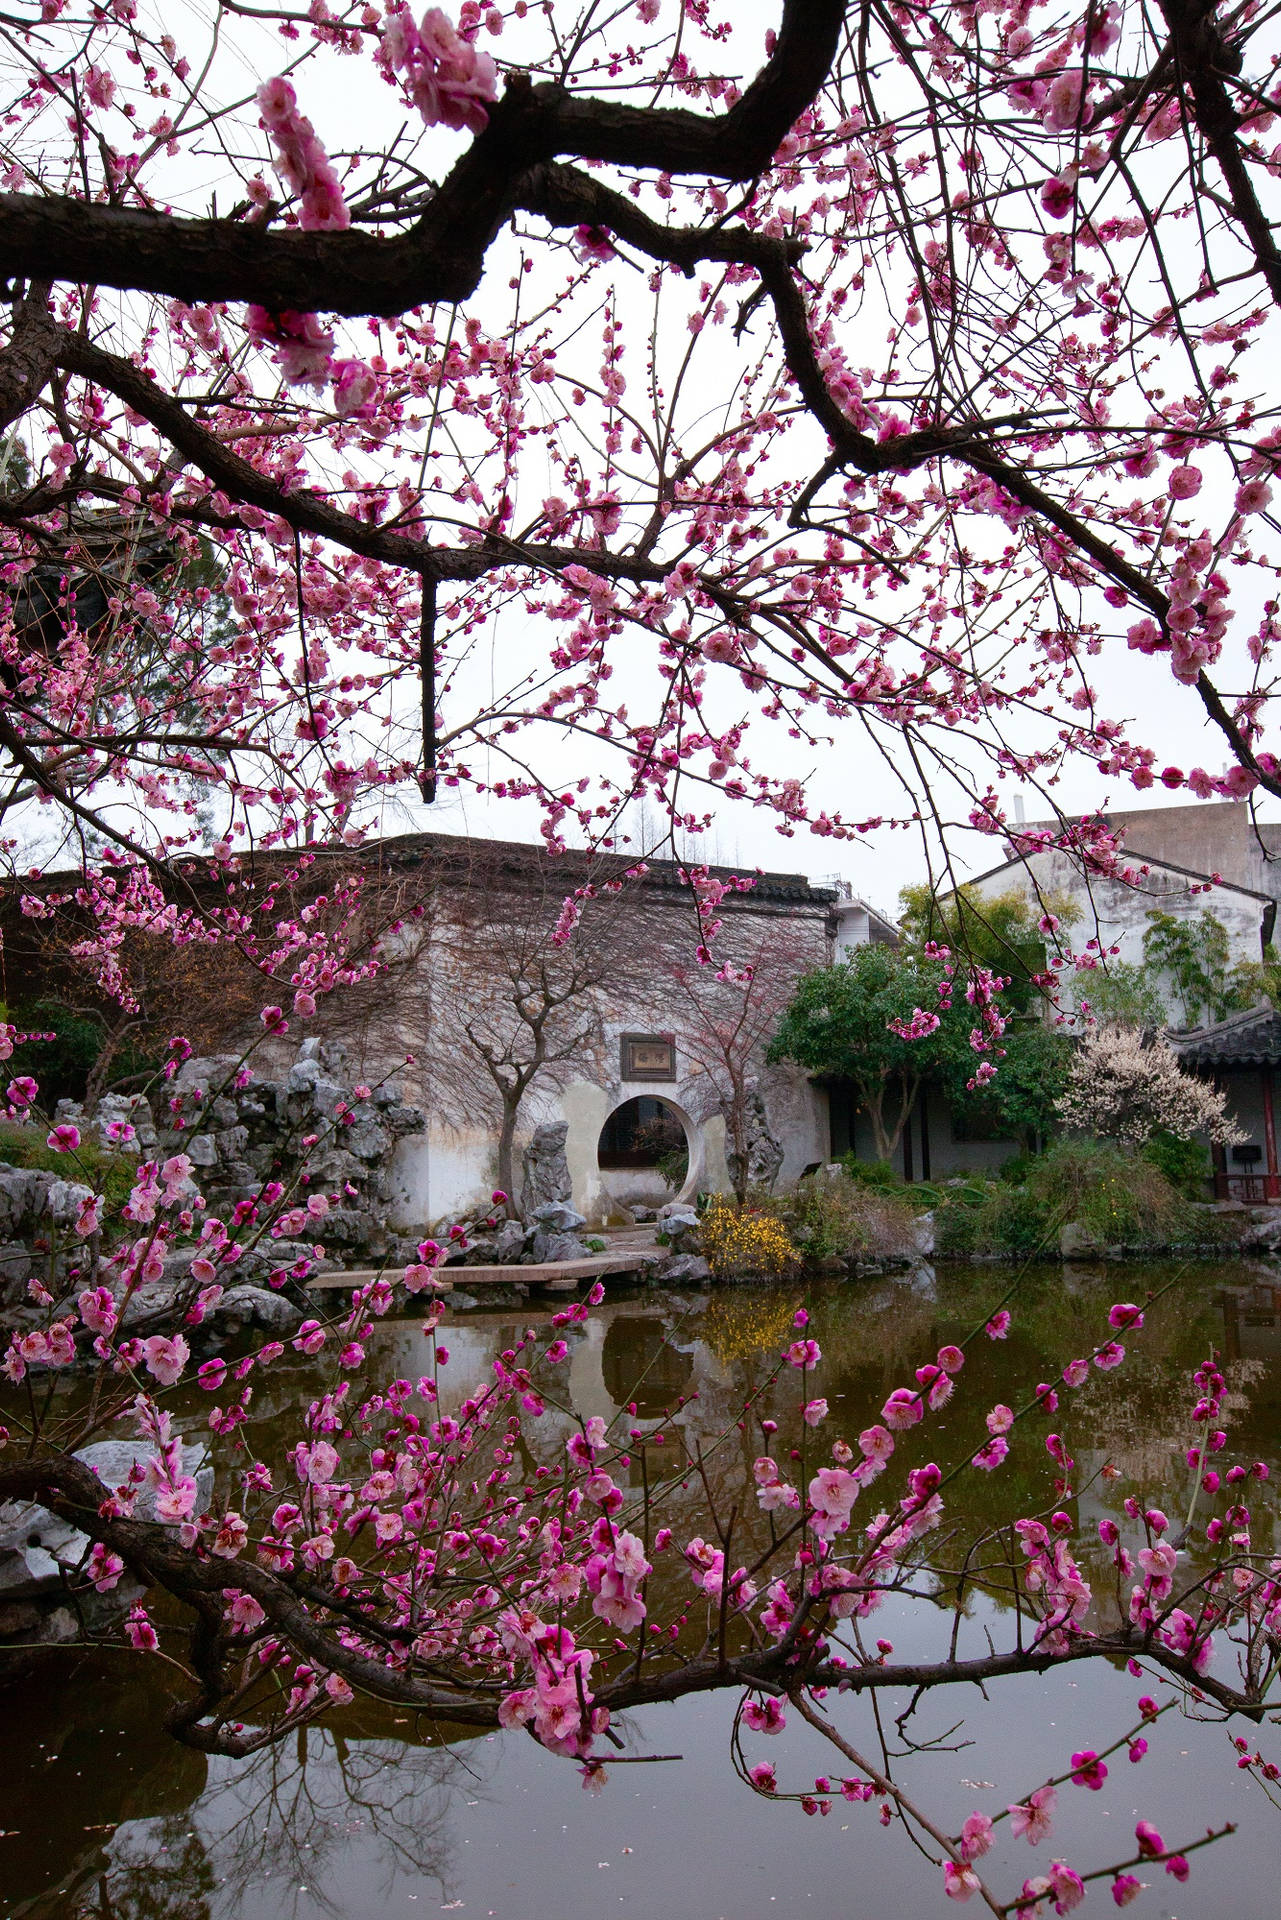 A Picturesque View Of The Serene Waters And Traditional Architecture In Suzhou, China Background